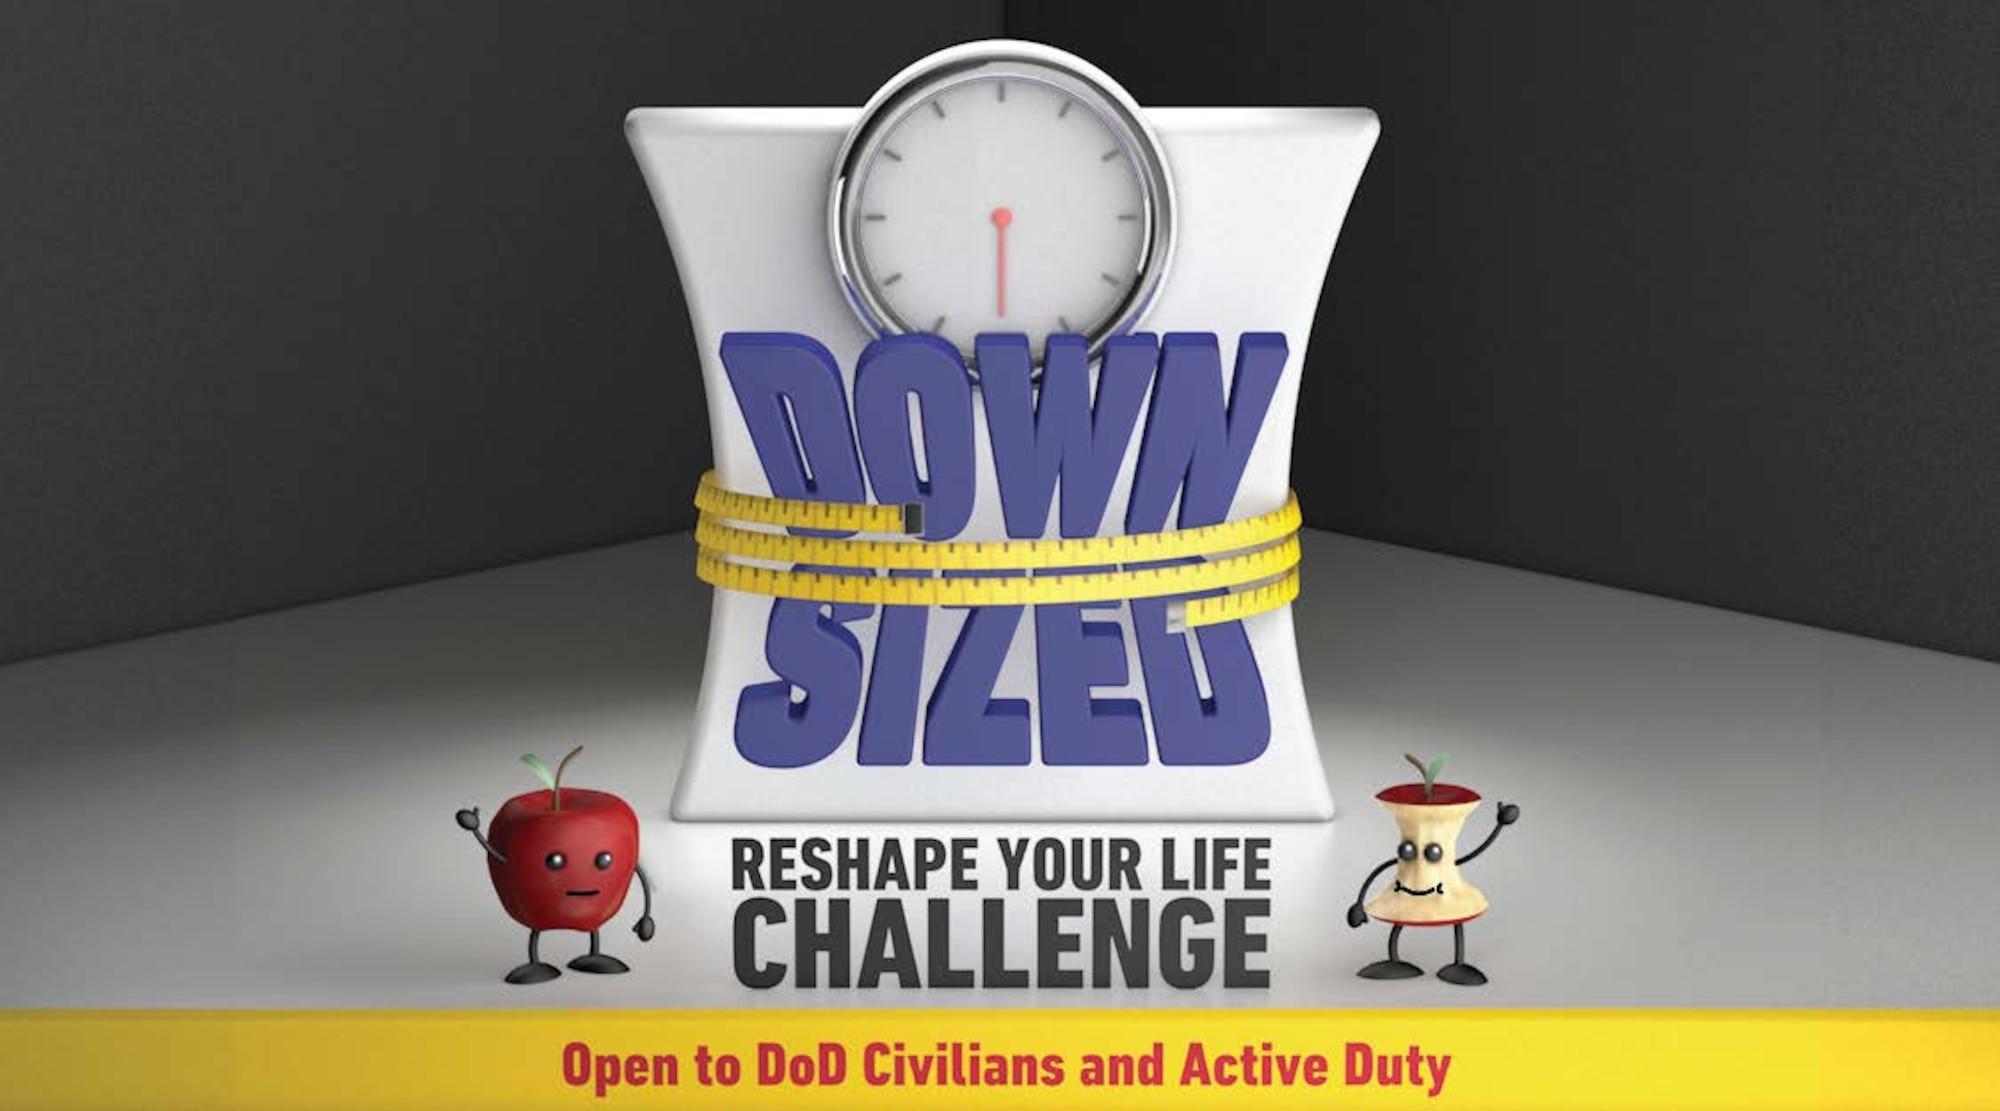 Reshape your life this fall with the 2018 DOWNSIZED Challenge. (U.S. Air Force graphic)